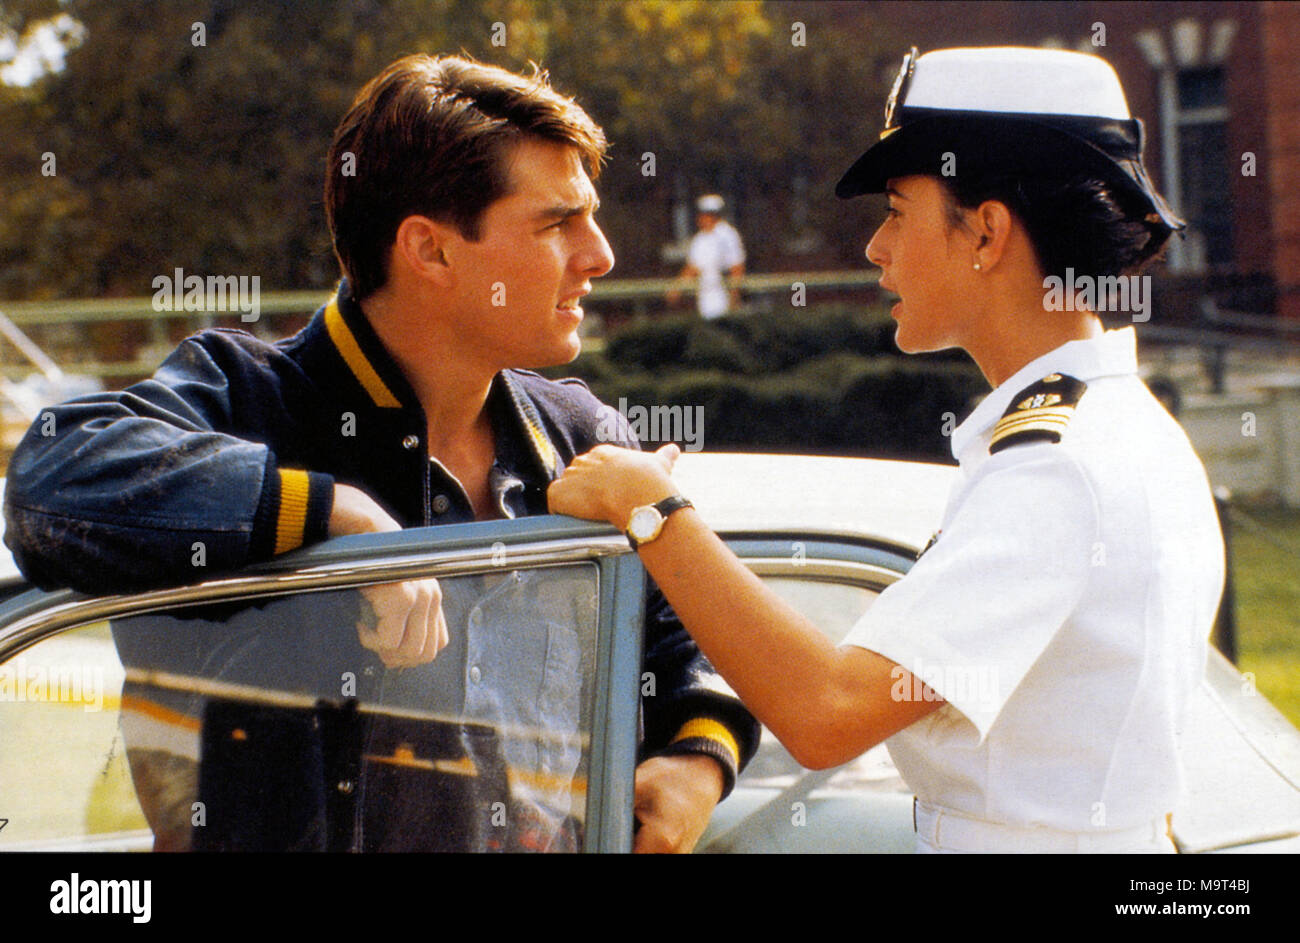 A FEW GOOD MEN 1992 Castle Rock Entertainment film with Tom Cruise and Demi Moore Stock Photo